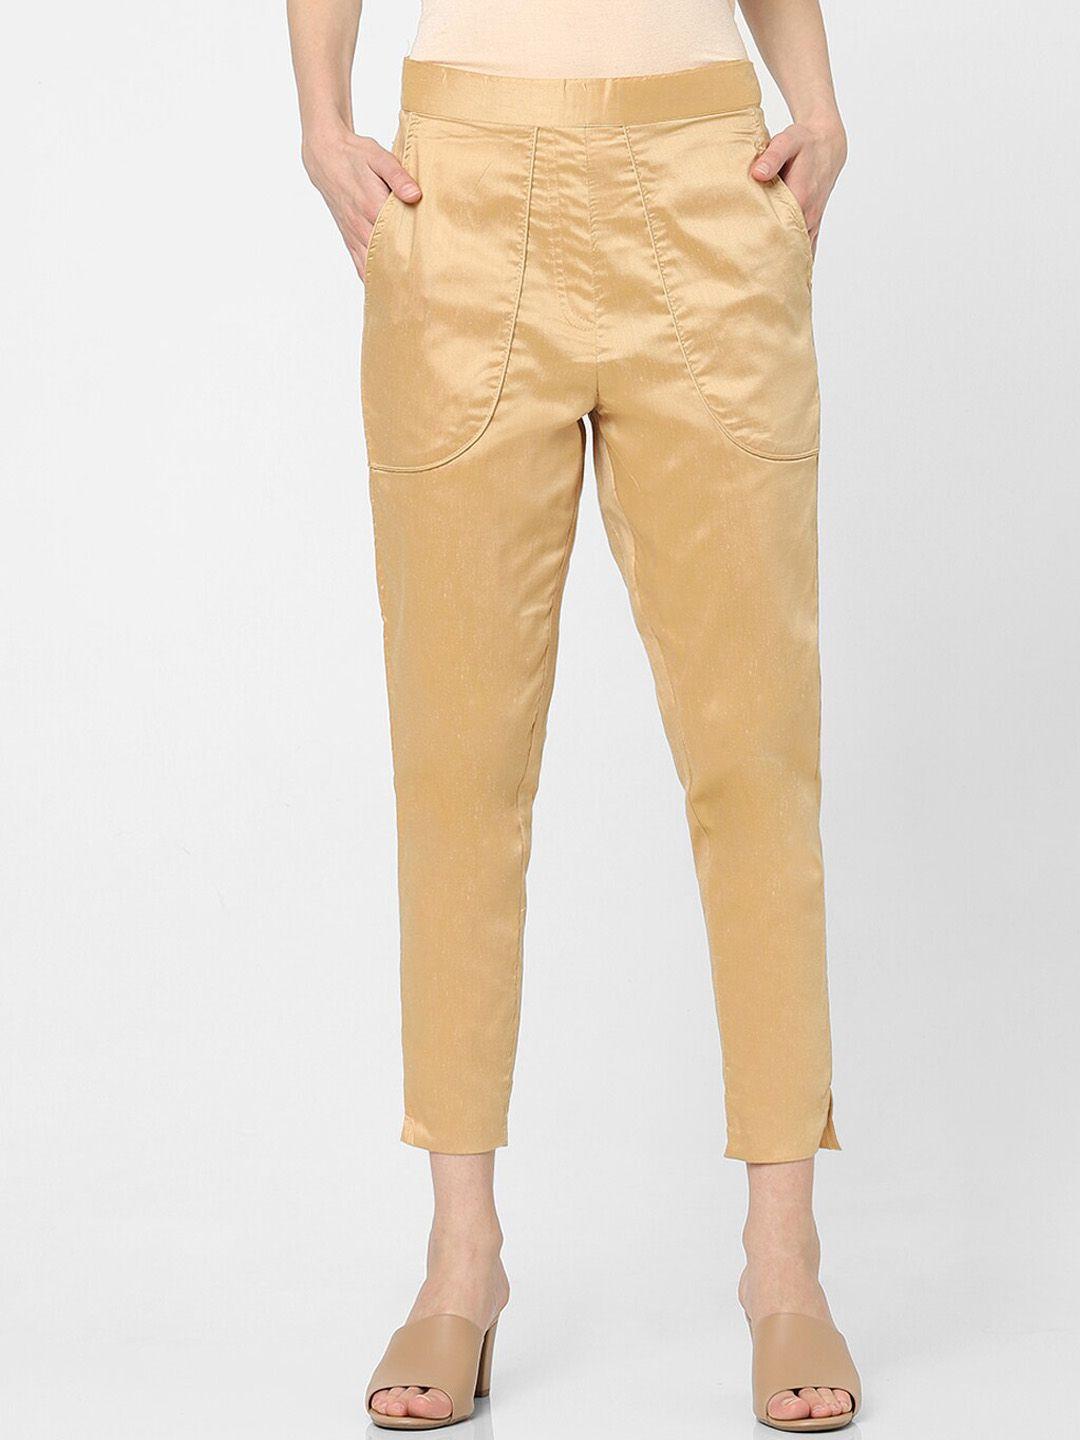 indifusion-women-gold-toned-high-rise-culottes-trousers